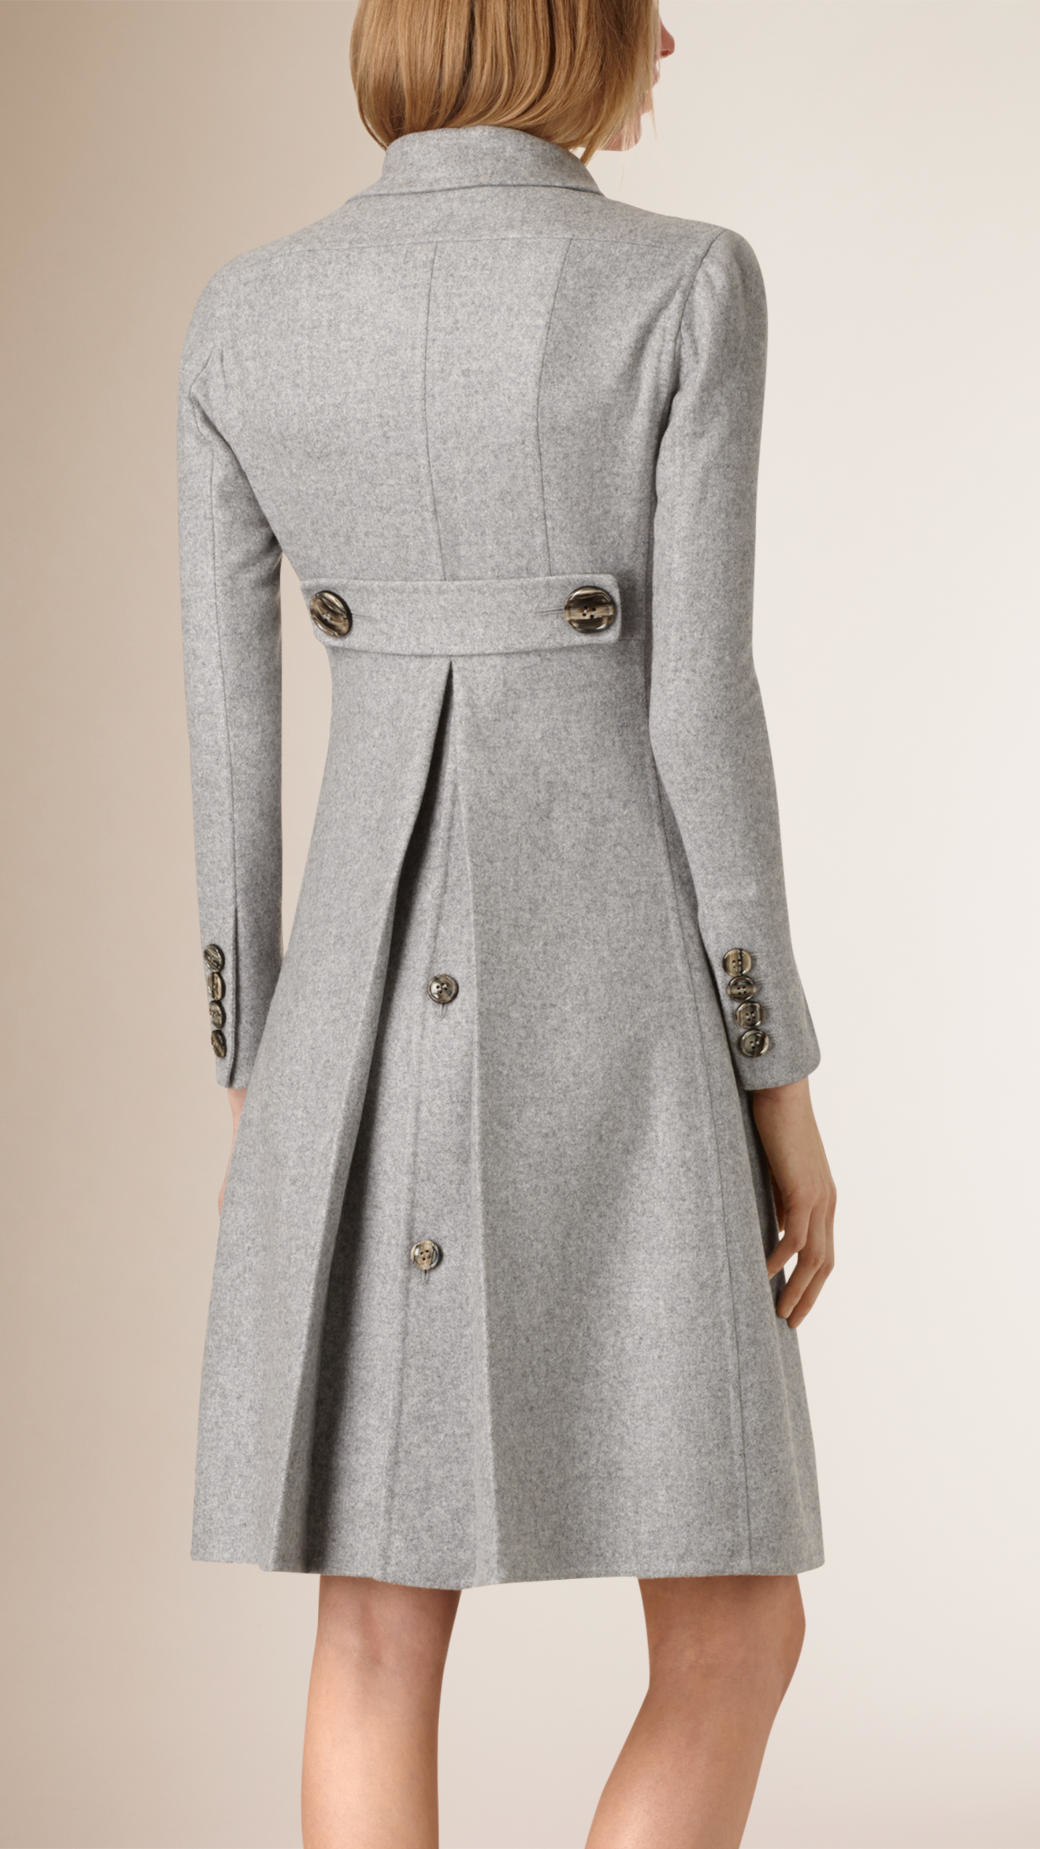 Lyst - Burberry Tailored Double-breasted Cashmere Coat in Gray